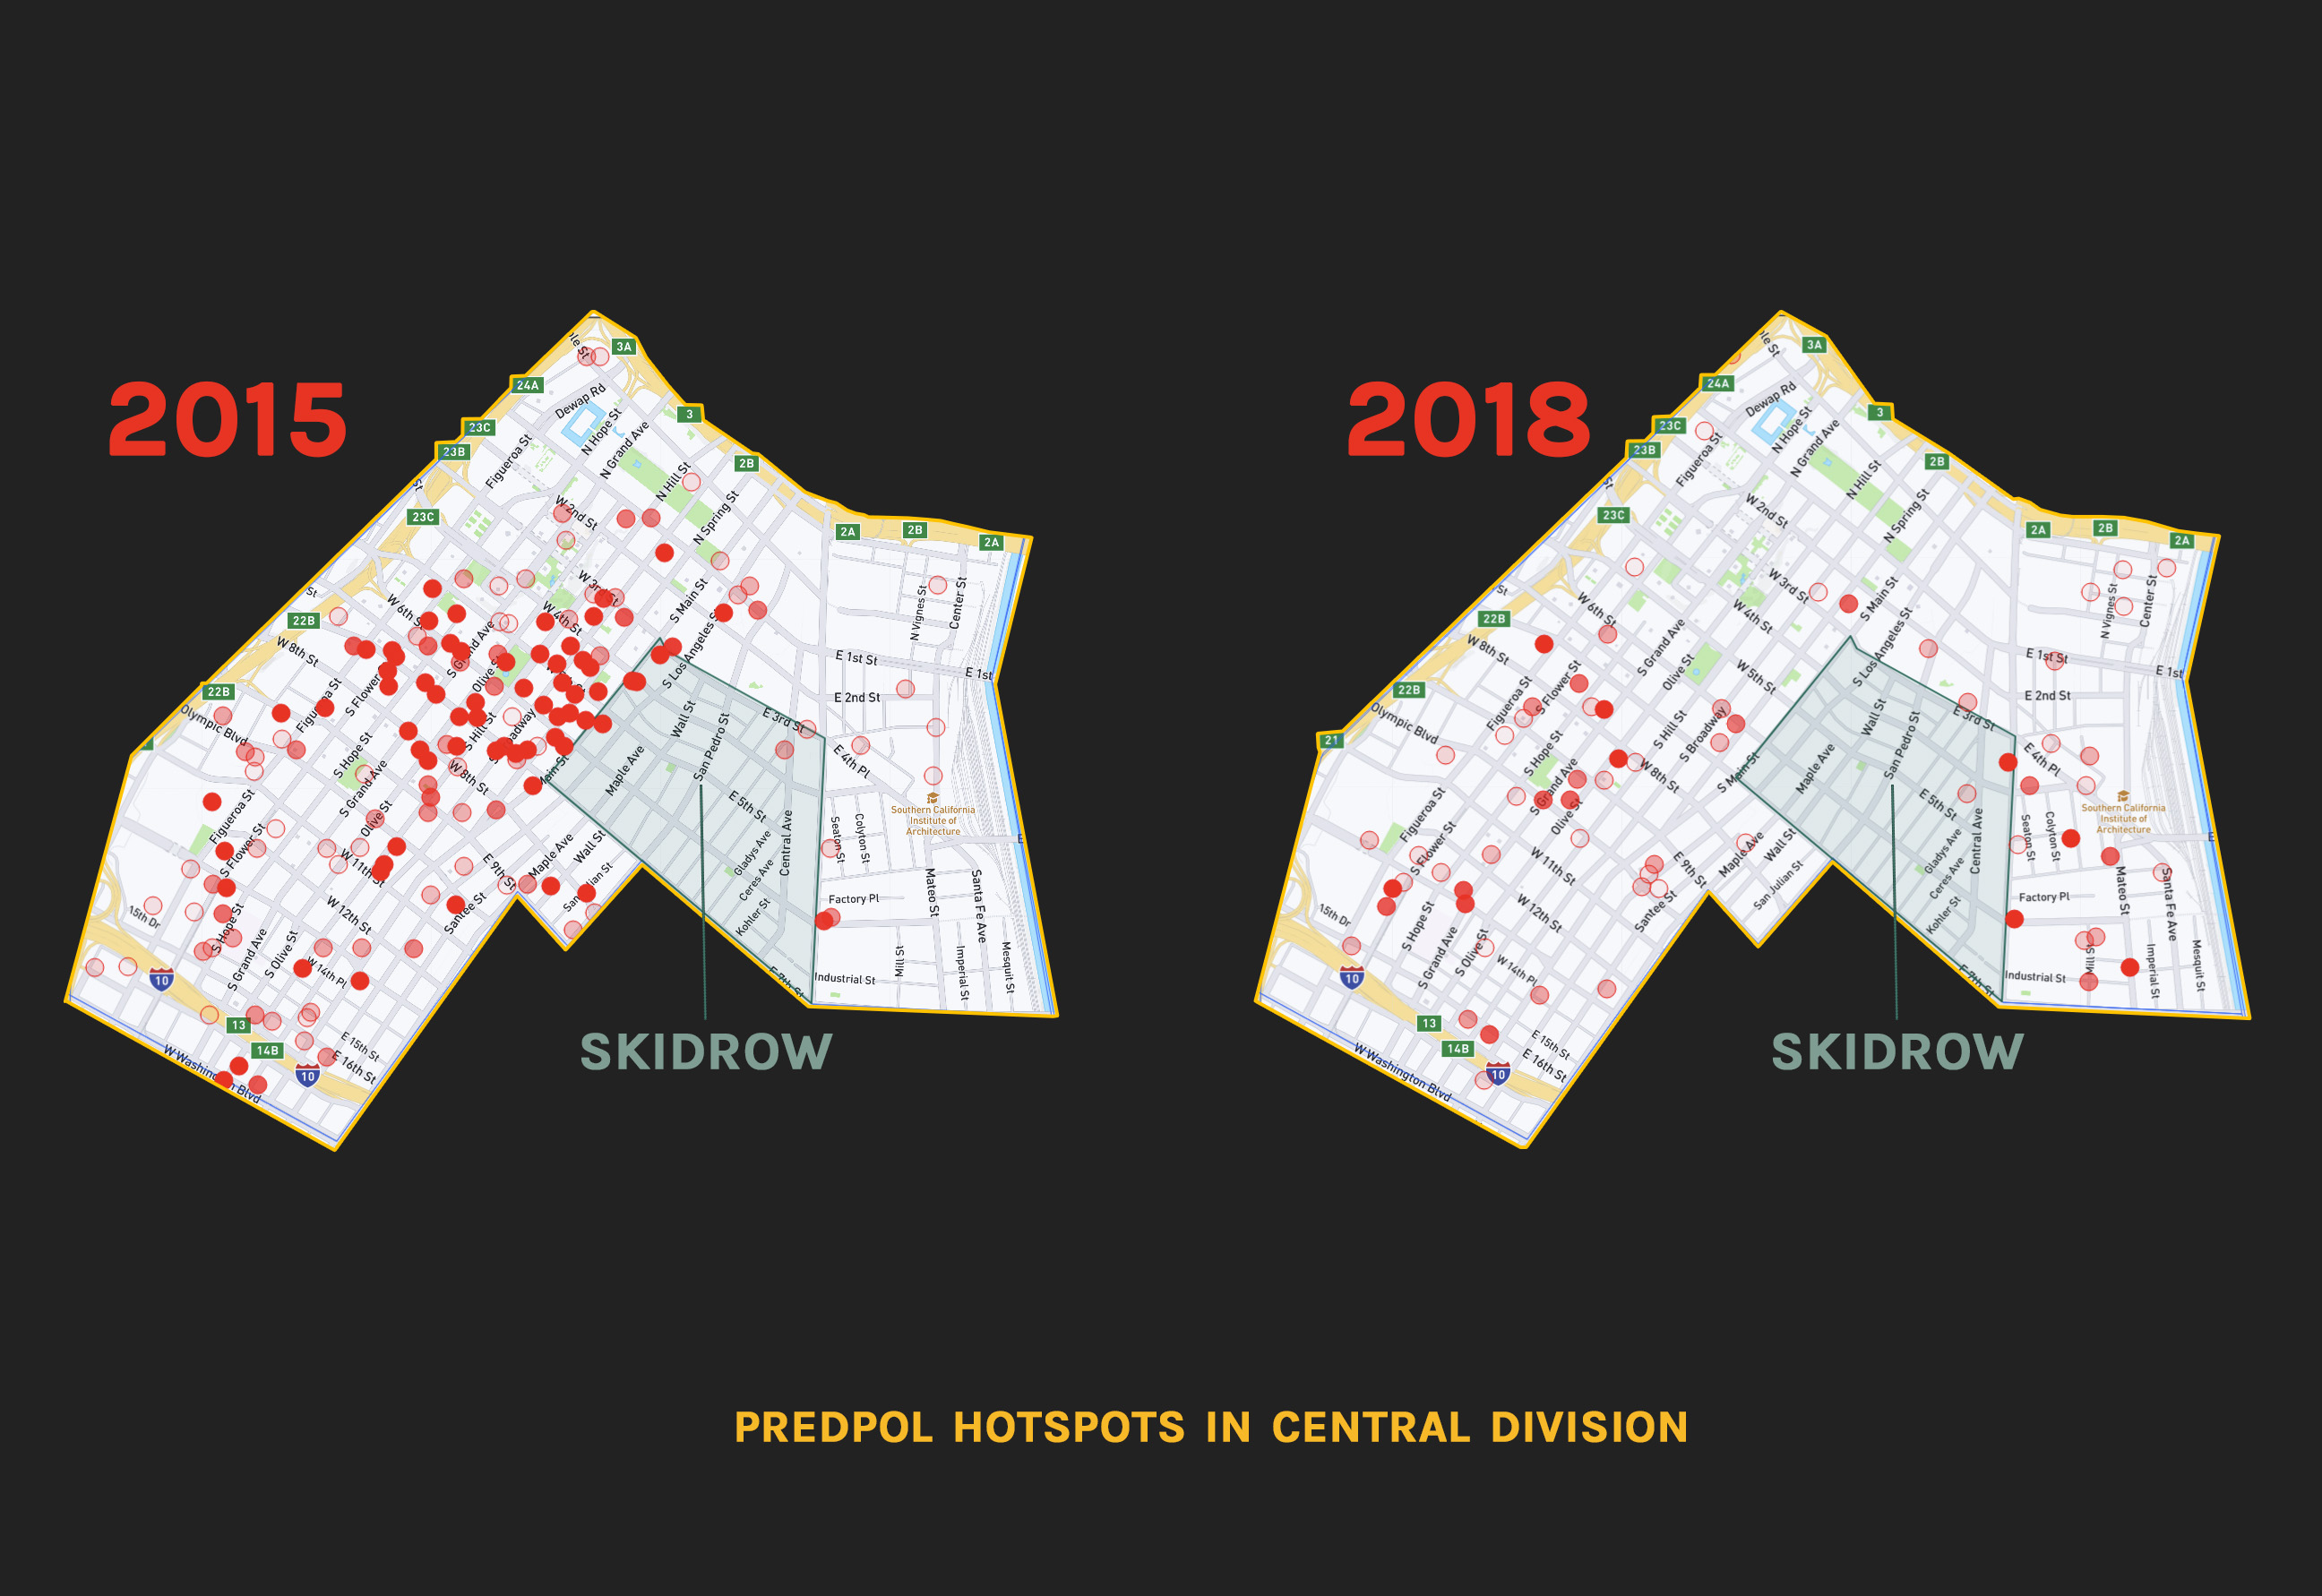 What these maps show is that the PredPol hot spots instead quarantine the community of Skid Row, forming a divide or
          a digital wall or border of hot spot clusters. PredPol in fact automates patrols at what had been traditionally called
          the “buffer zones” of the containment strategy long used to contain Skid Row. The overall impact is restriction, enclosure, and punishment.